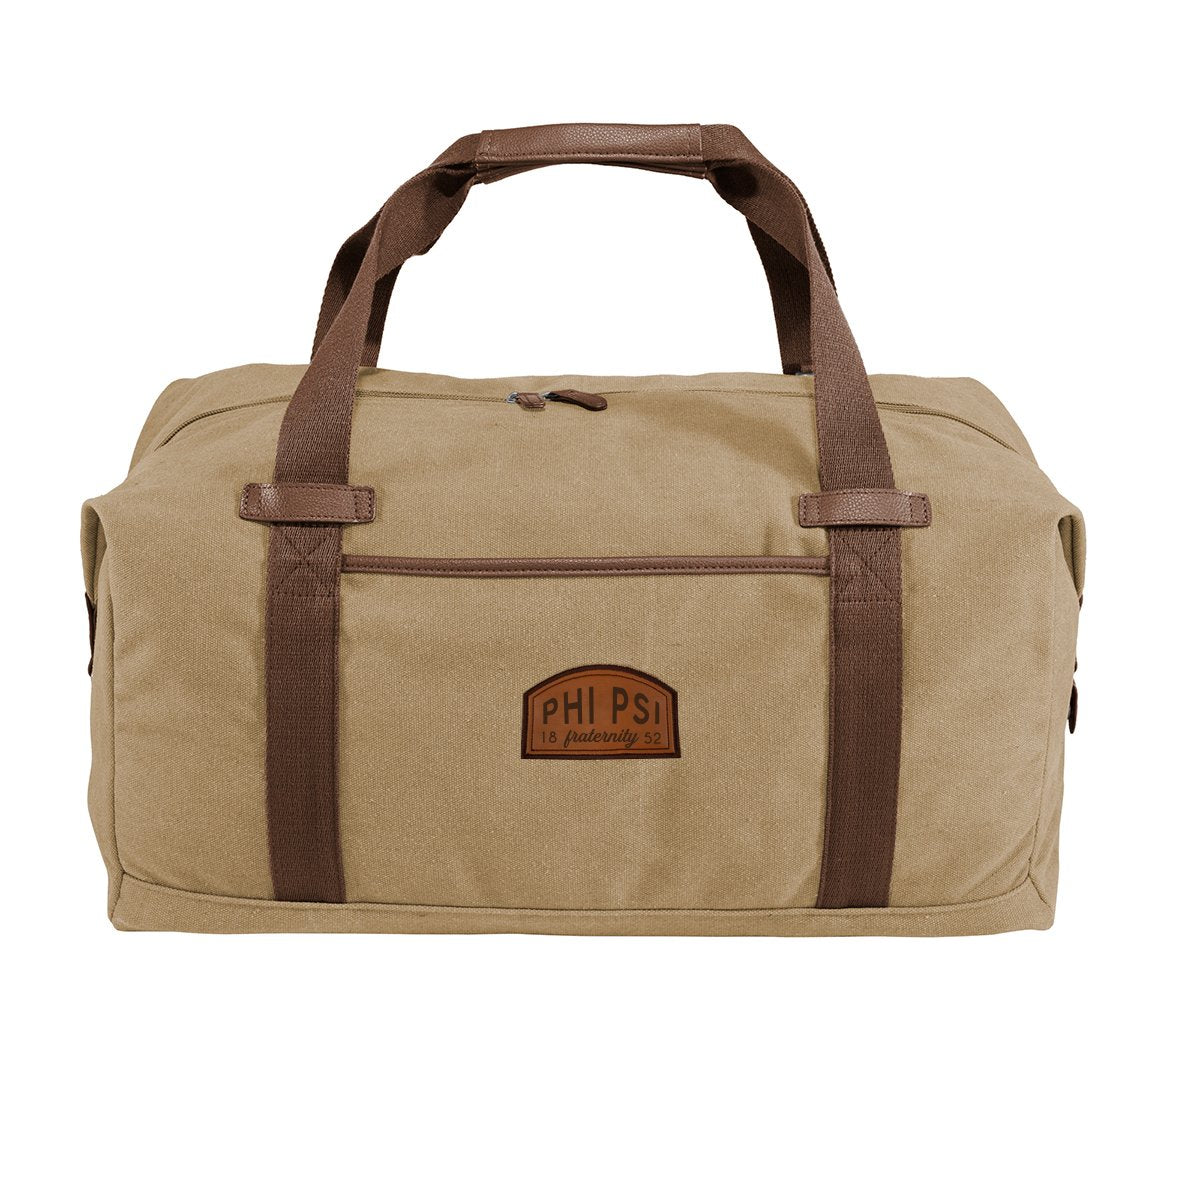 Phi Psi Khaki Canvas Duffel With Leather Patch | Phi Kappa Psi | Bags > Duffle bags